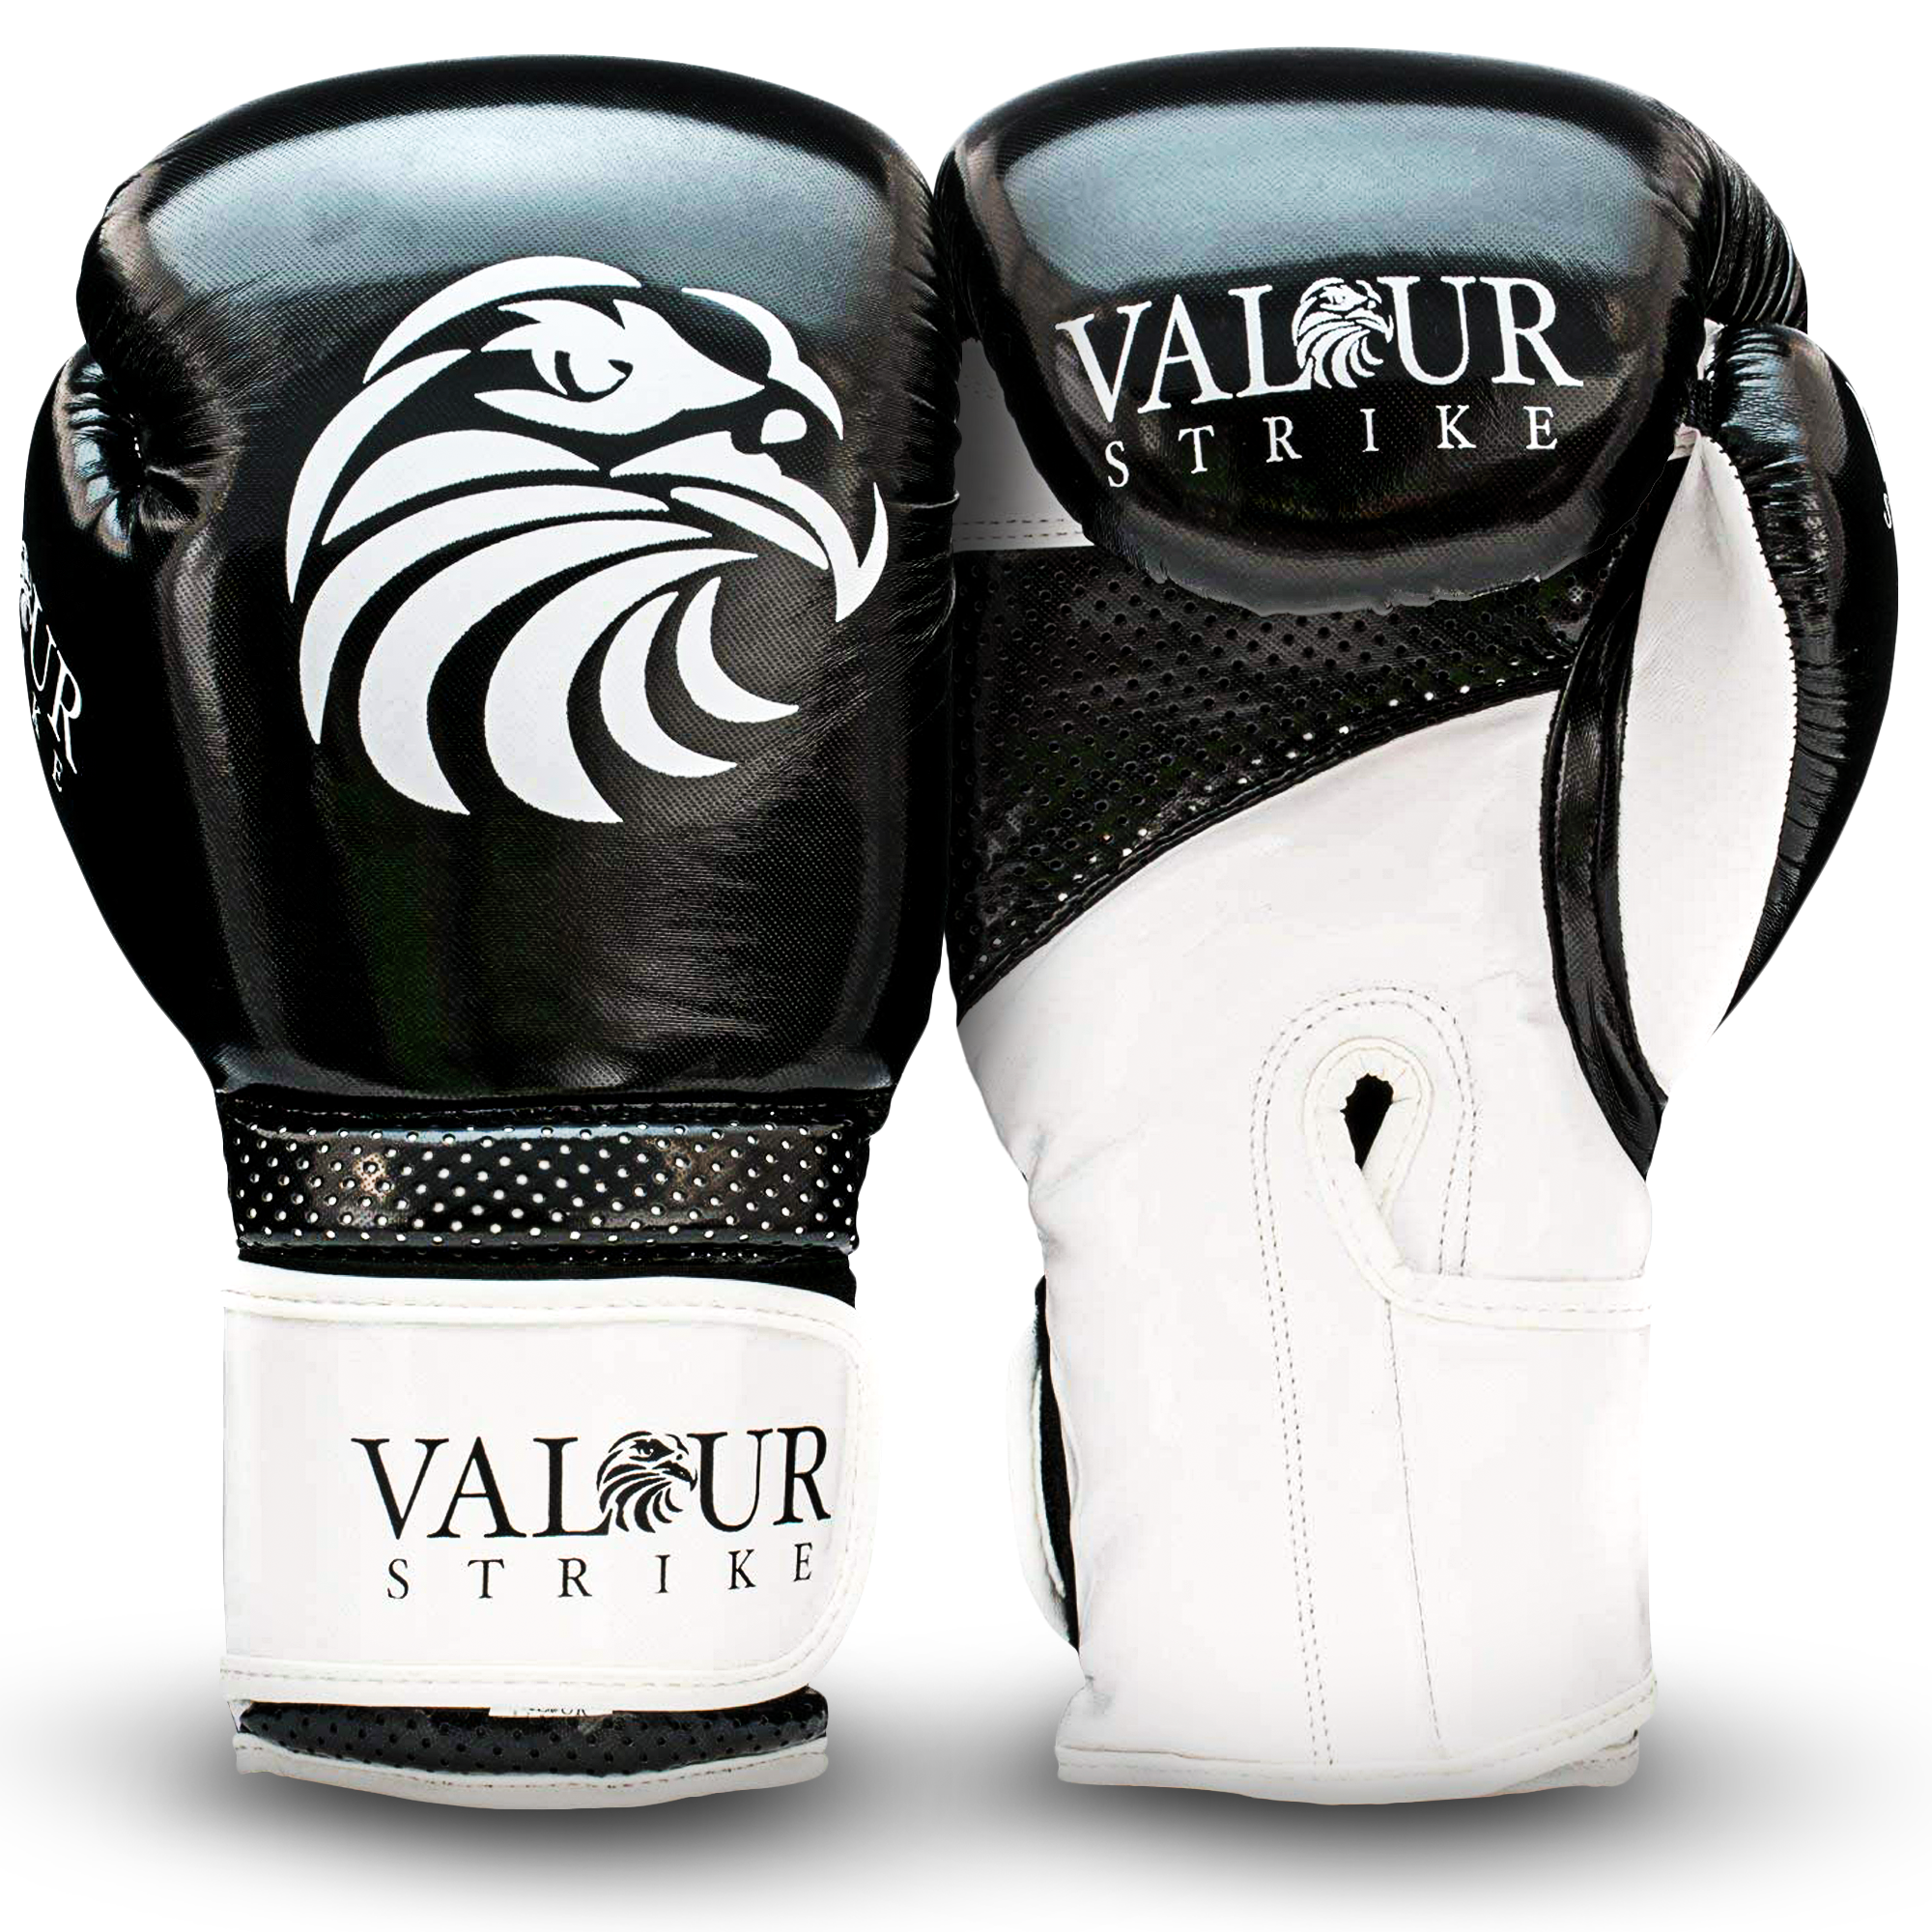 black boxing gloves by valour strike for boxing kickboxing mma combat sports